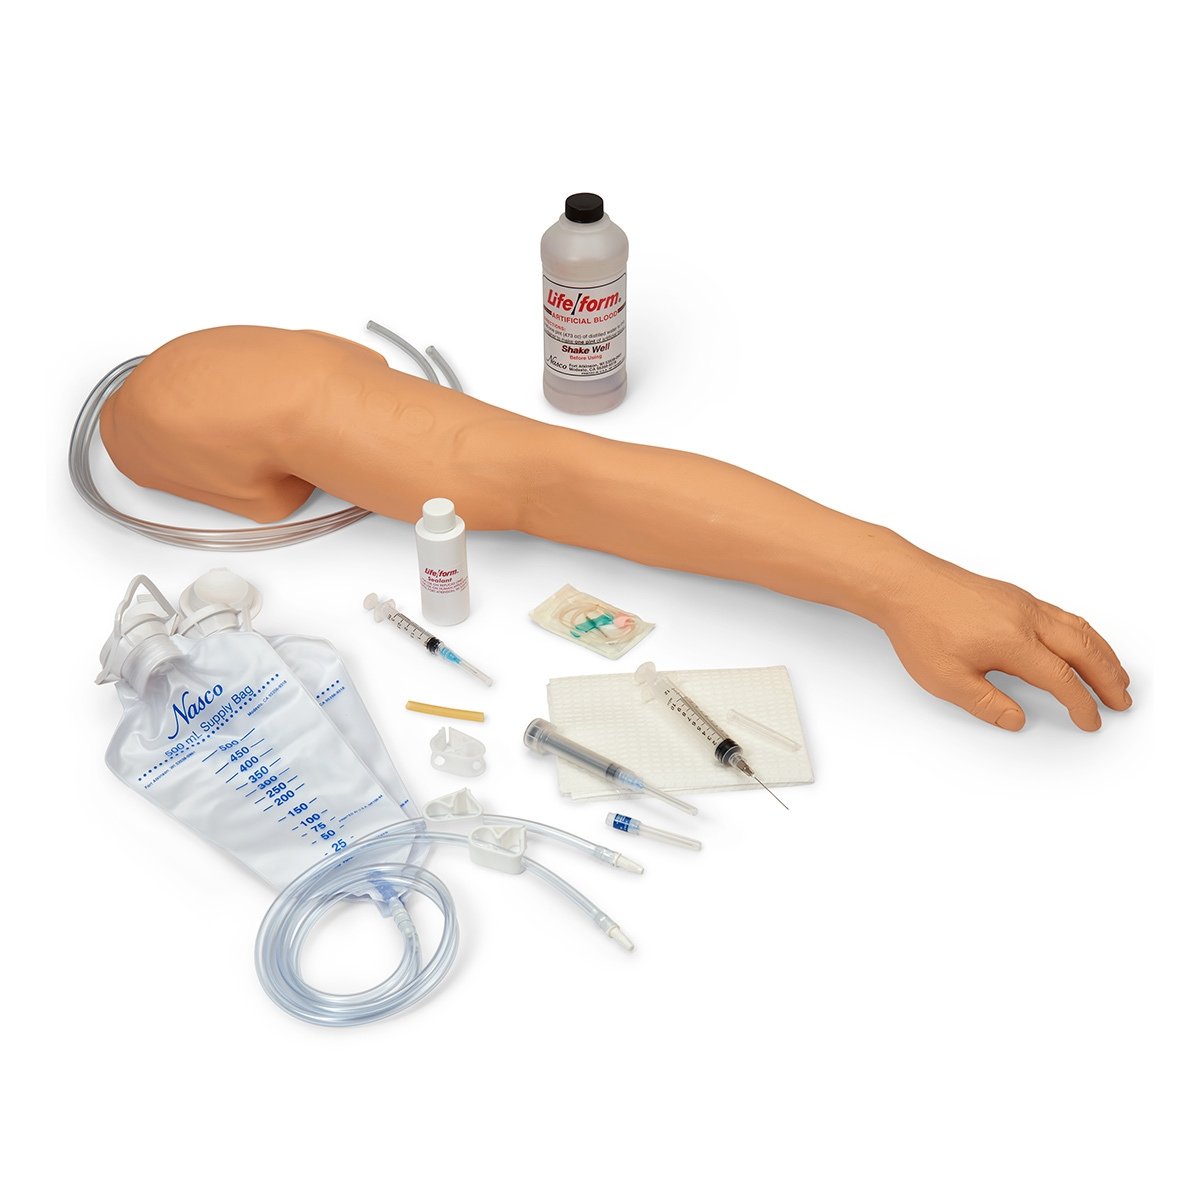 Life/form Advanced Venipuncture and Injection Arm - Light